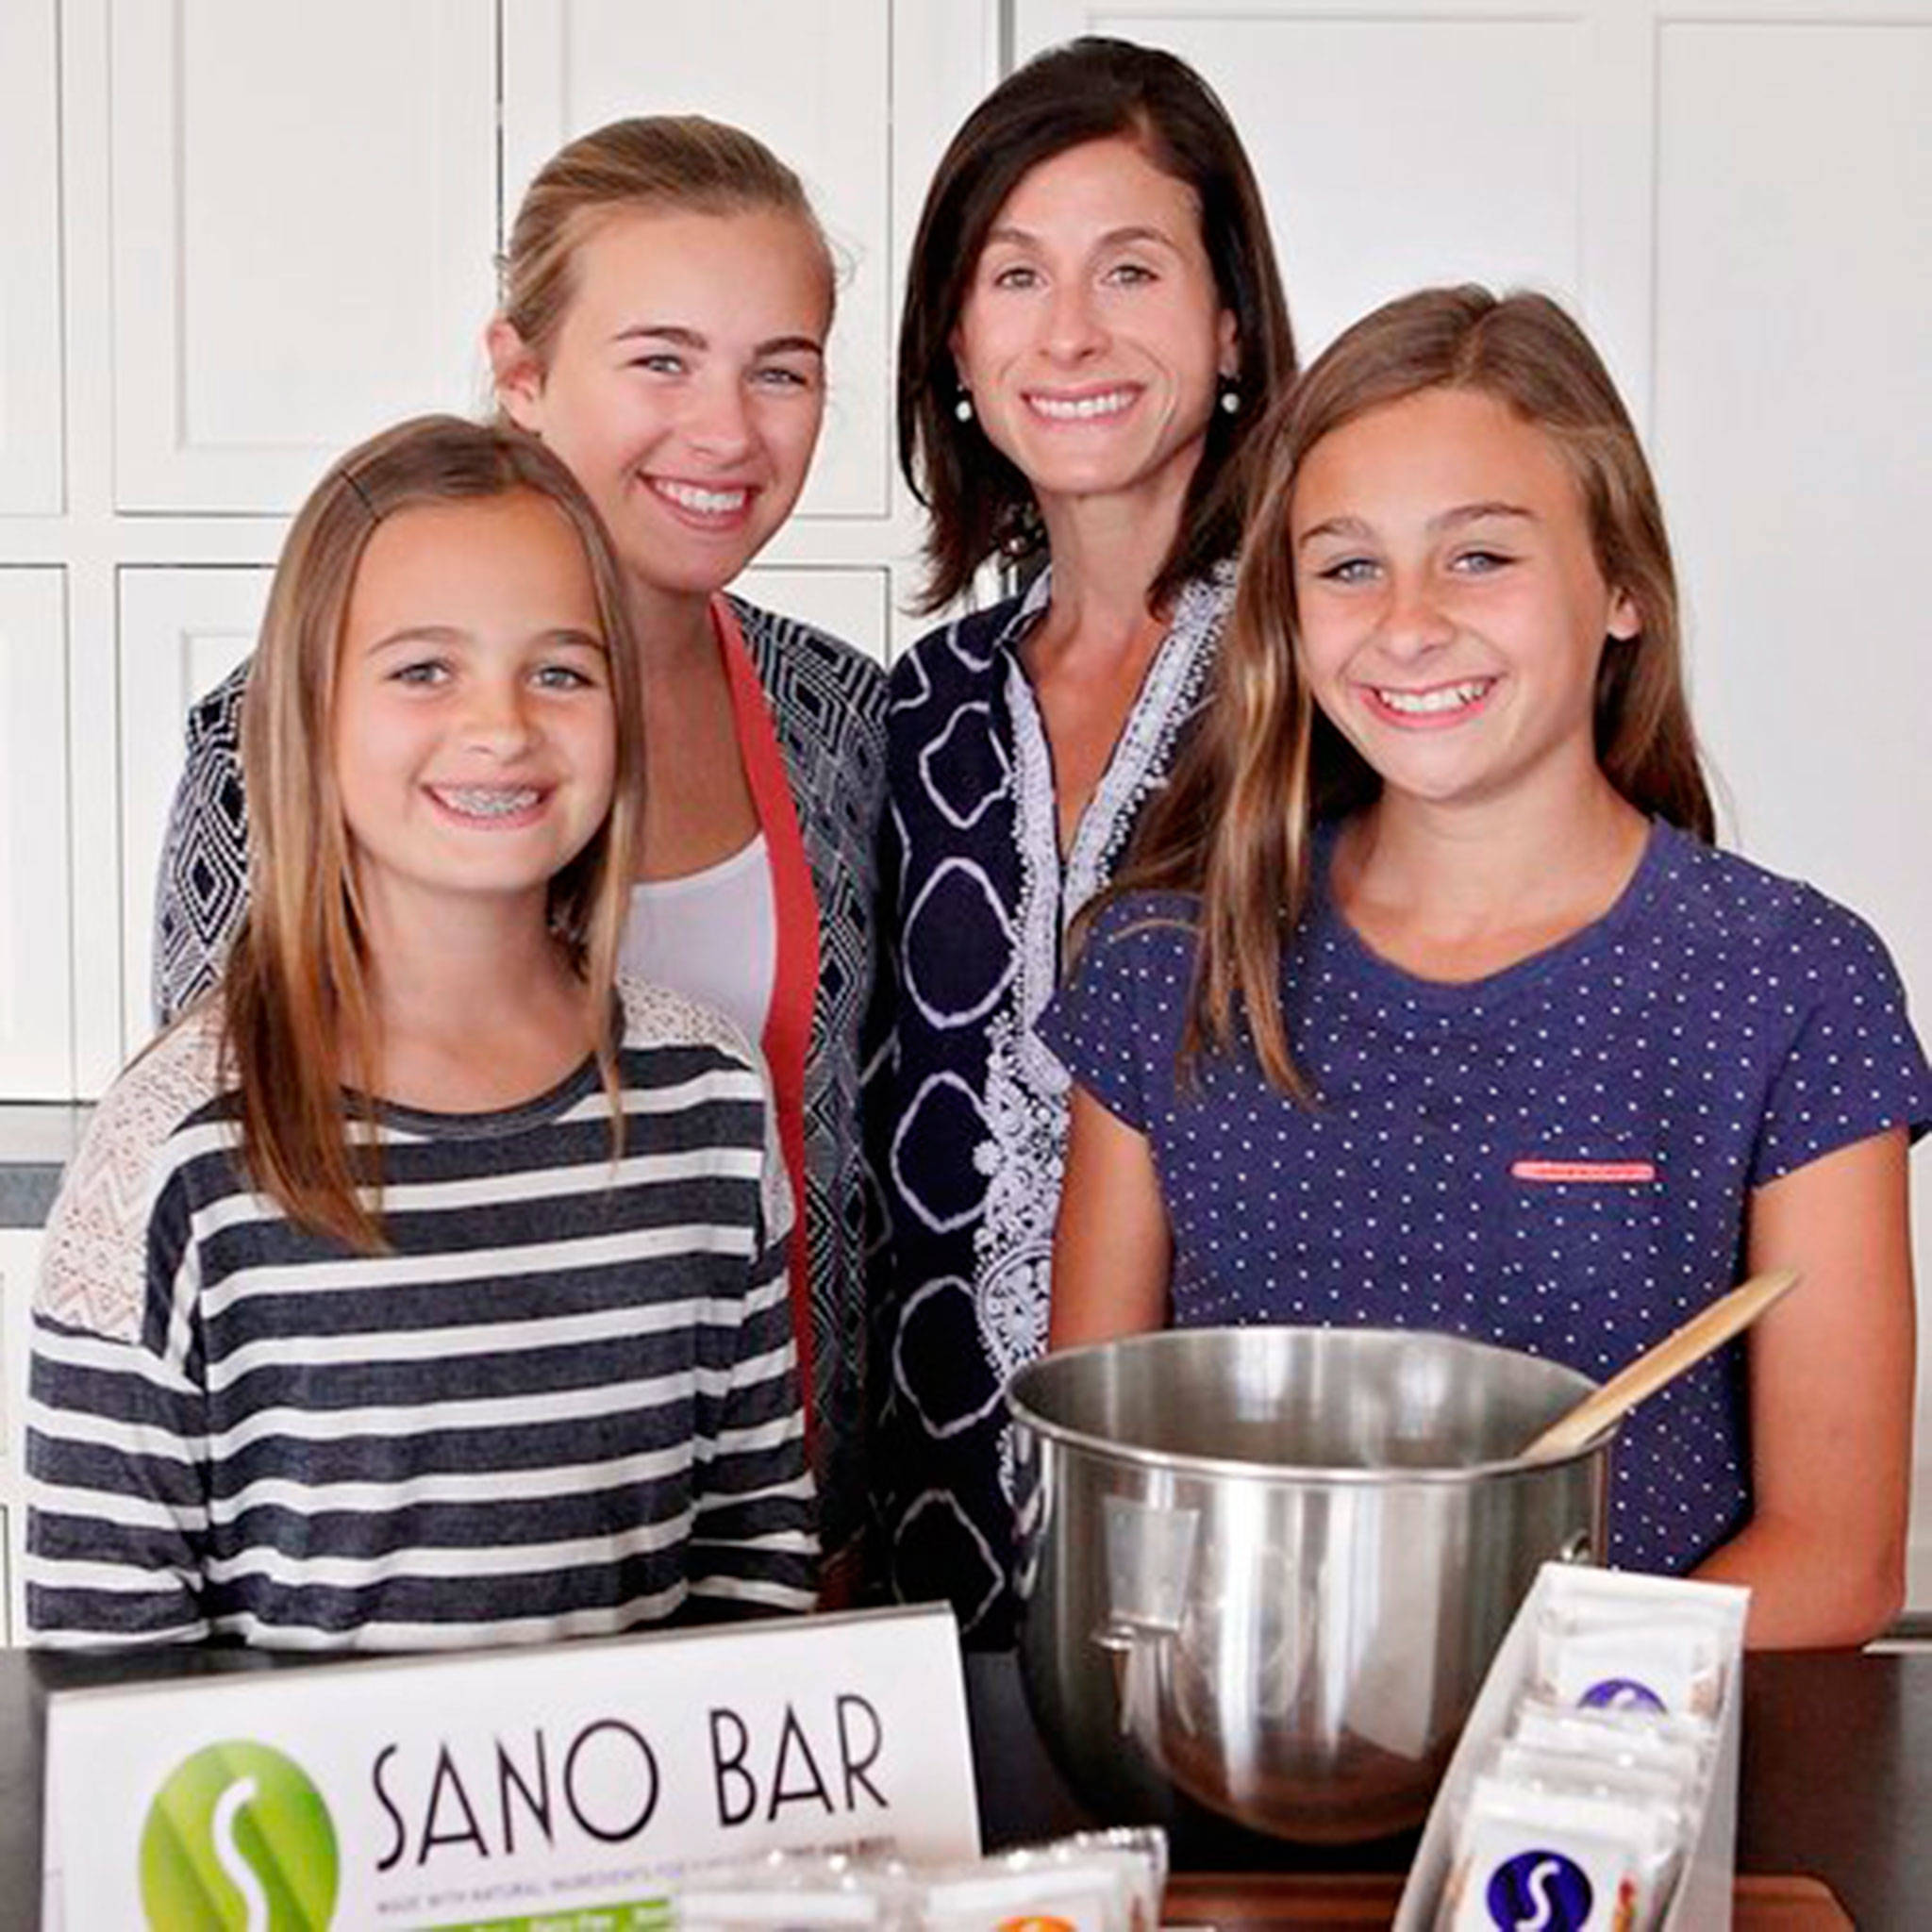 Lisa Nordstrom and her daughters created Sano Bar to provide a healthy snack option and give back by donating profits to local charities. Nordstrom says she hopes to sell the bars in her new Sano Cafe. Photo via thesanocafe.com